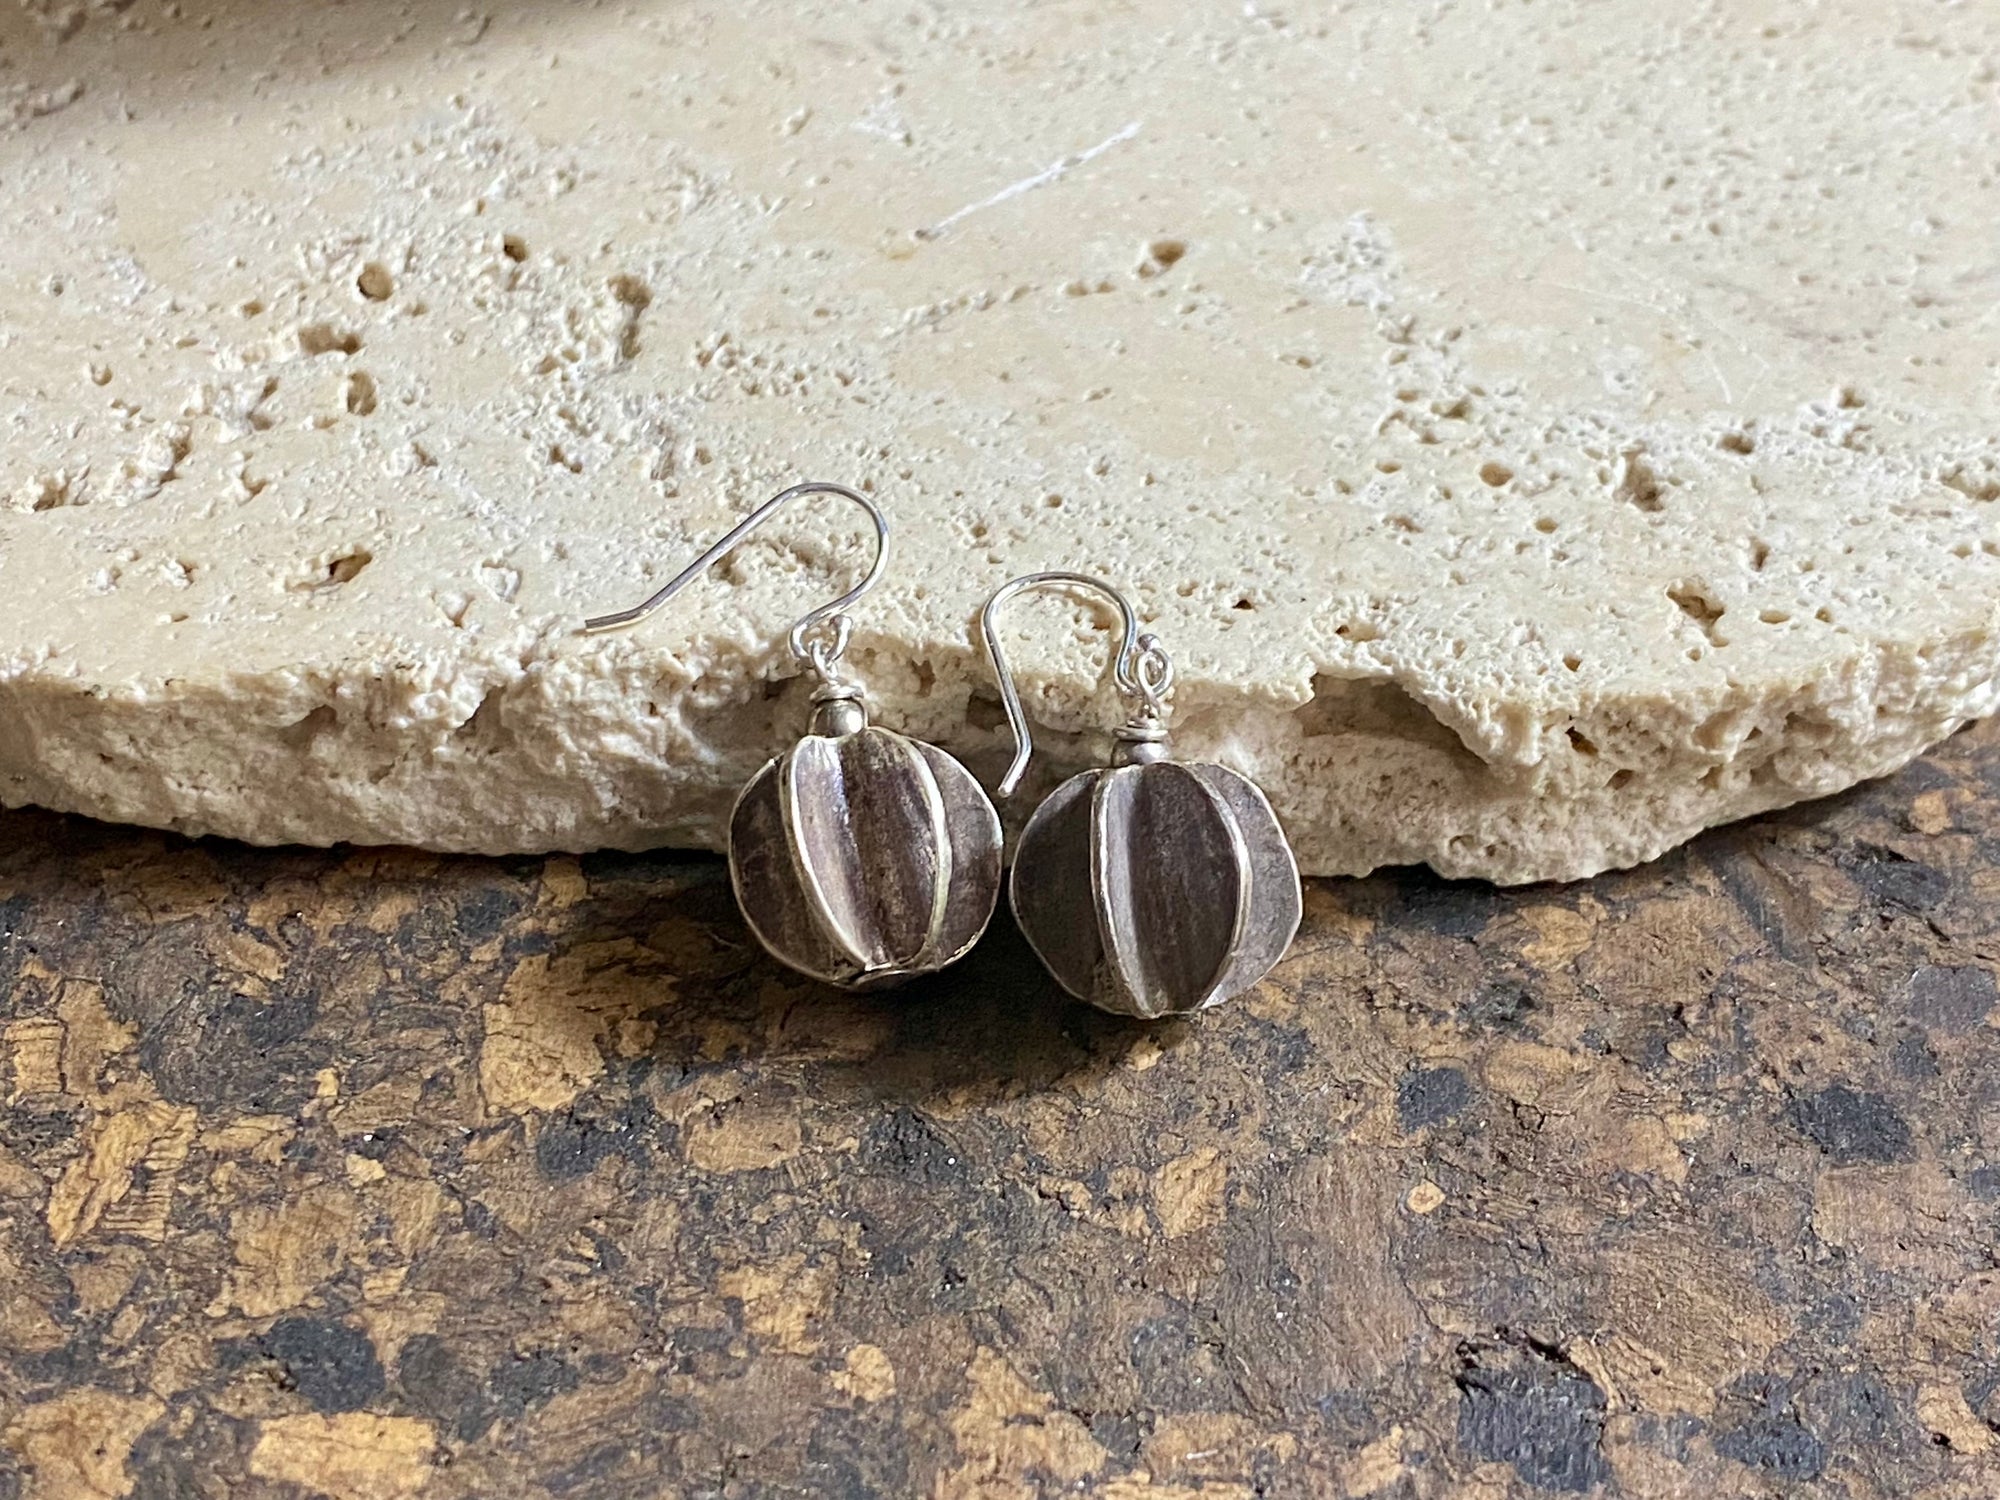 One of our most popular earring styles, these tribal look earrings are made with Karen hill tribe pumpkin charms of high grade silver (95%) and finished with sterling silver hooks. Measurements: charm 1.5 cm diameter, earring length 3 cm including hook